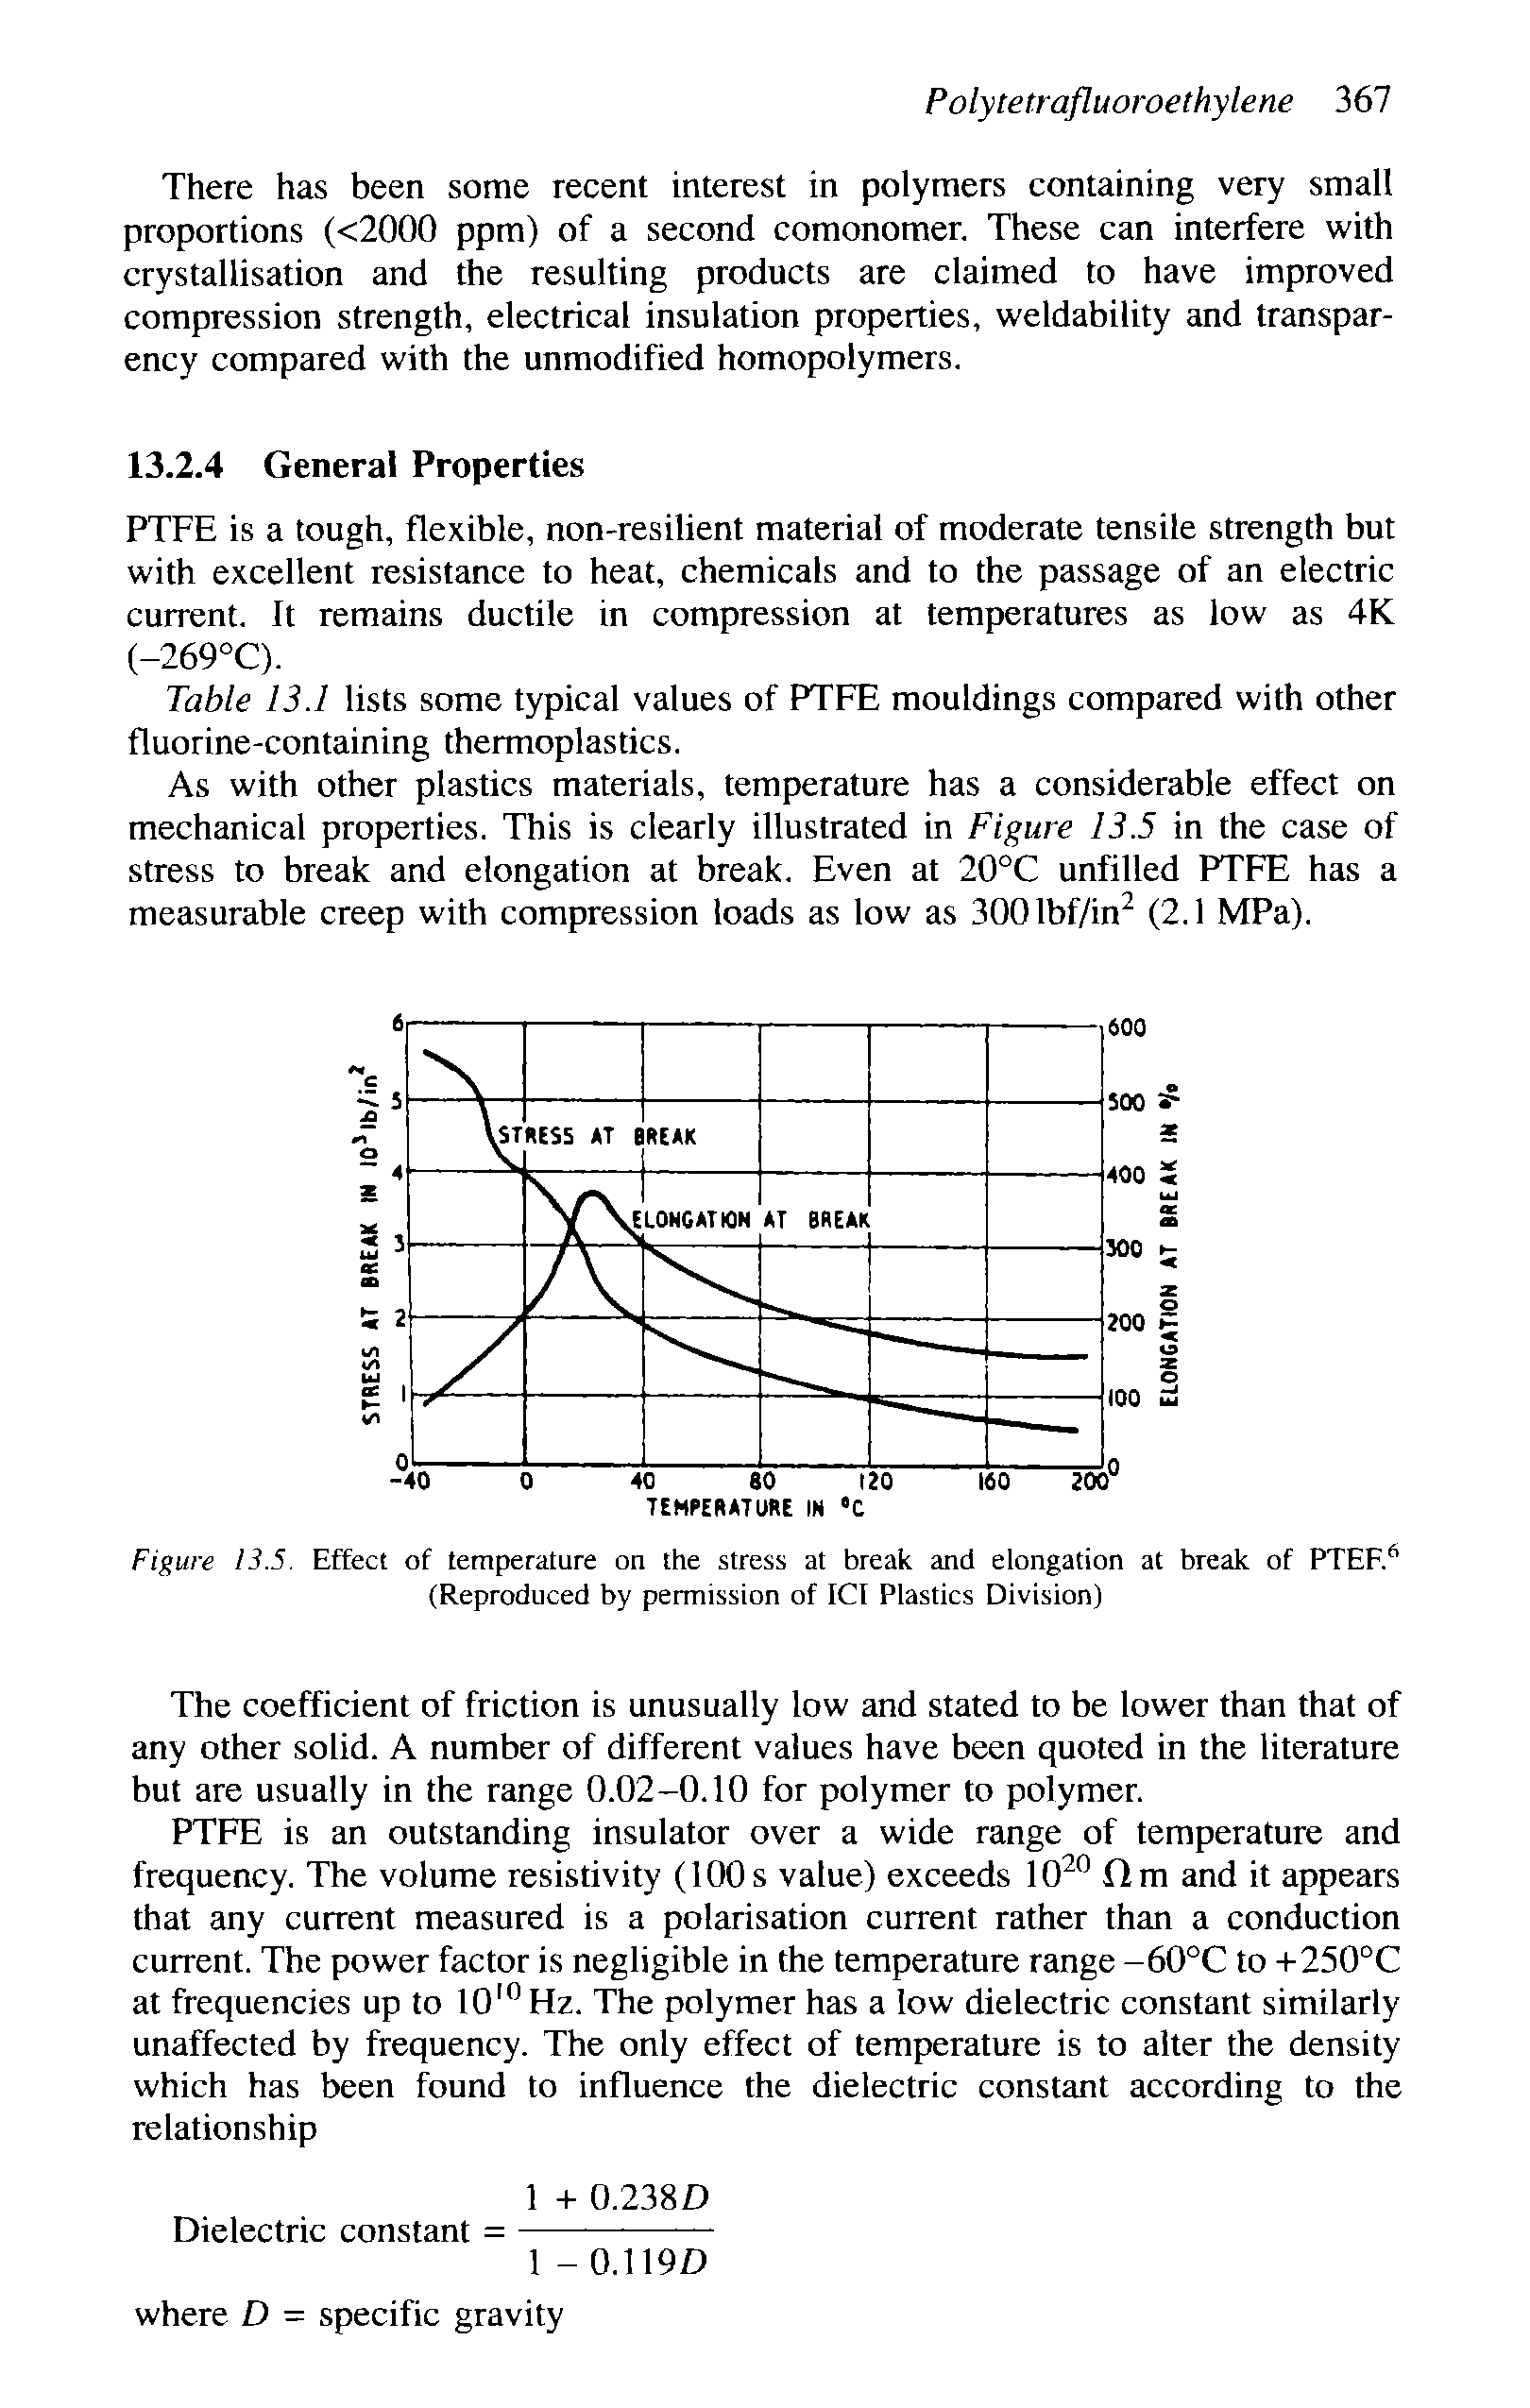 Figure 13.5. Effect of temperature on the stress at break and elongation at break of PTEF. (Reproduced by permission of ICT Plastics Division)...